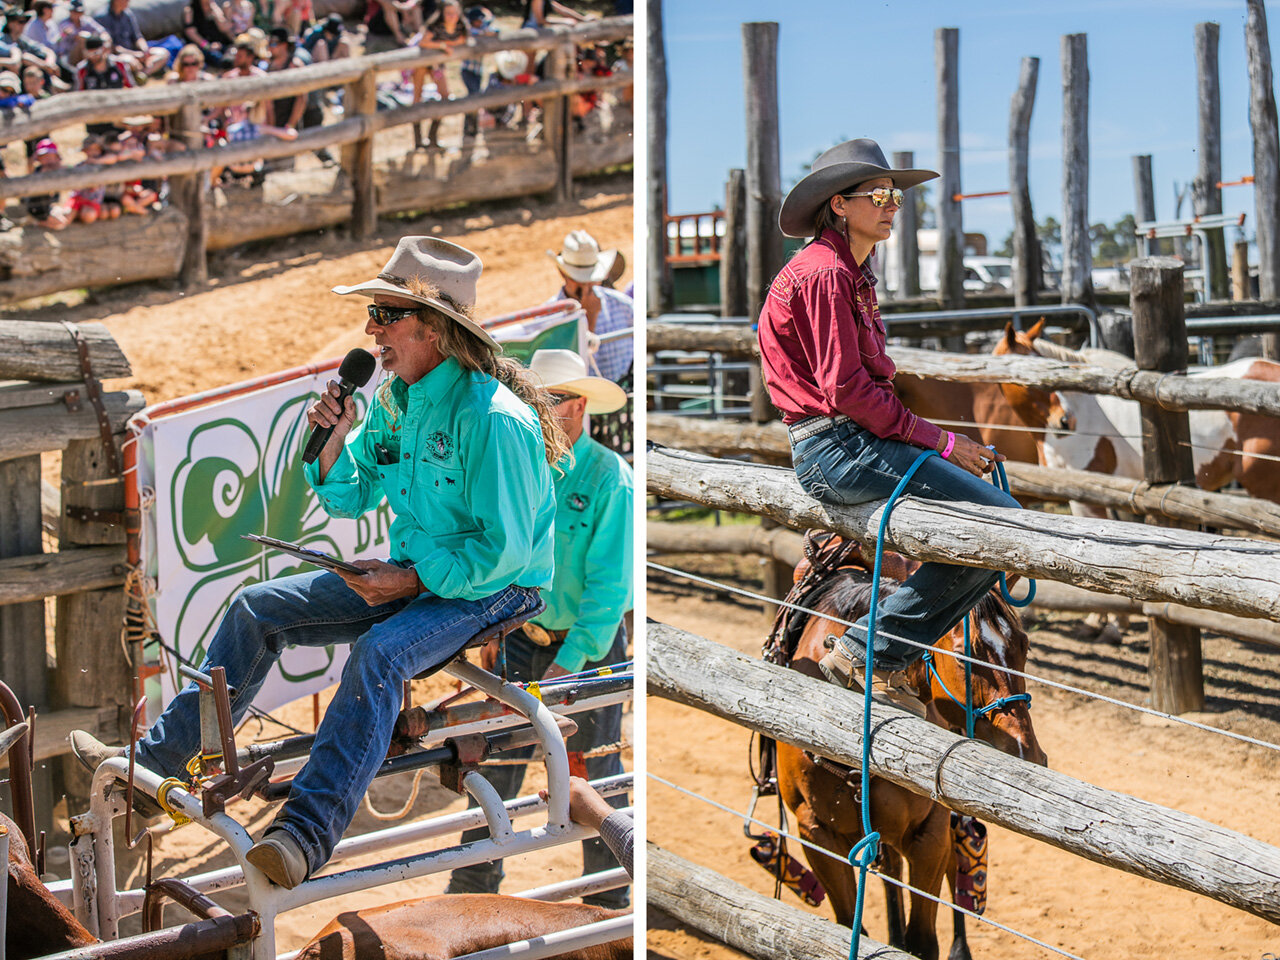 Kesty, Double-Barrel Entertainment, is one of the organisers of the Boyup Brook Rodeo